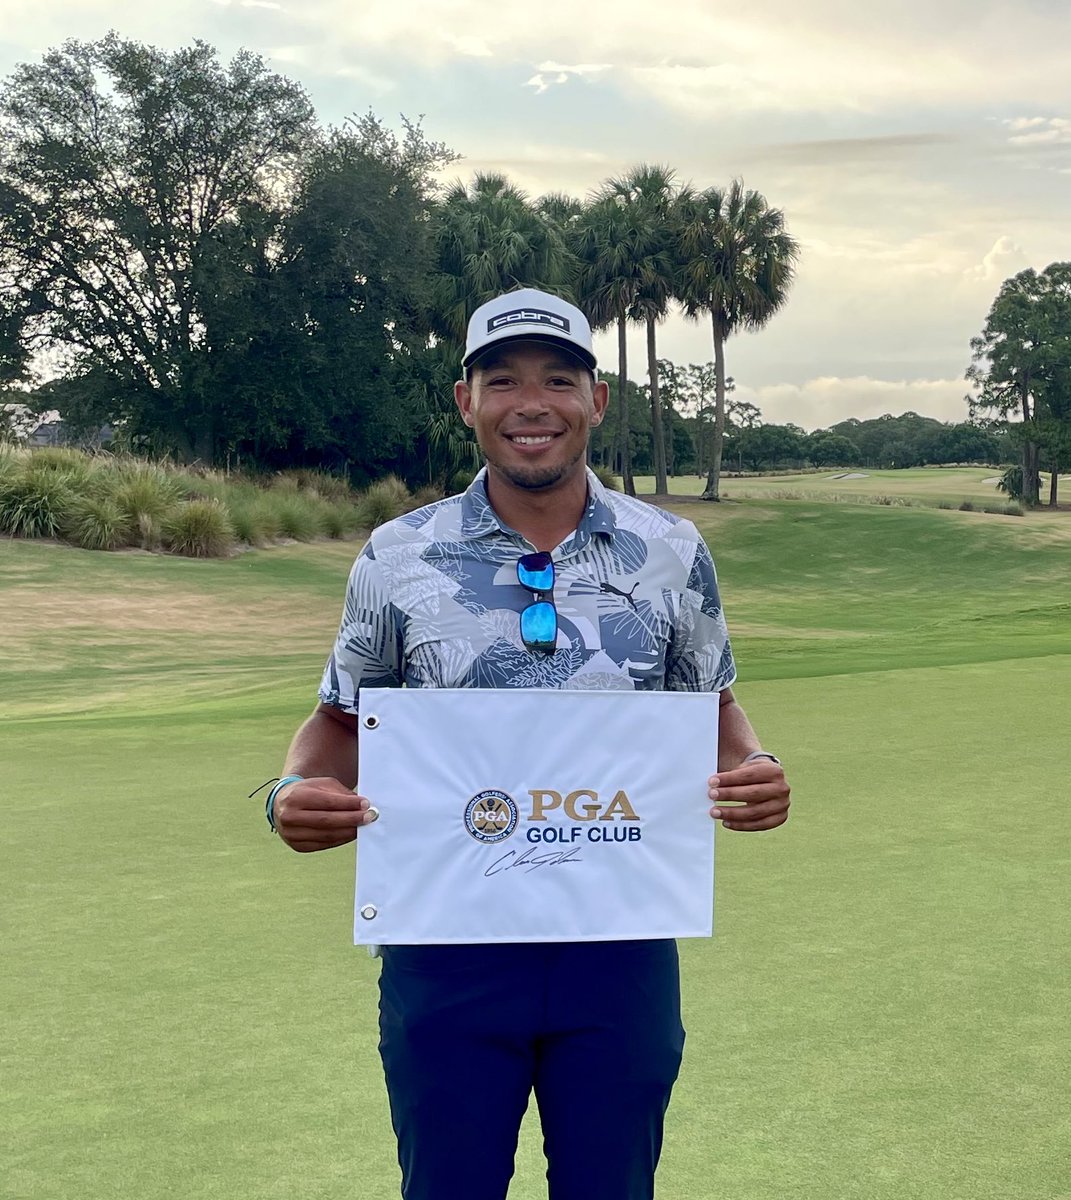 Congratulations to Chase Johnson on clinching his fourth APGA Tour victory at PGA Golf Club! 🏌🏽‍♂️🏆